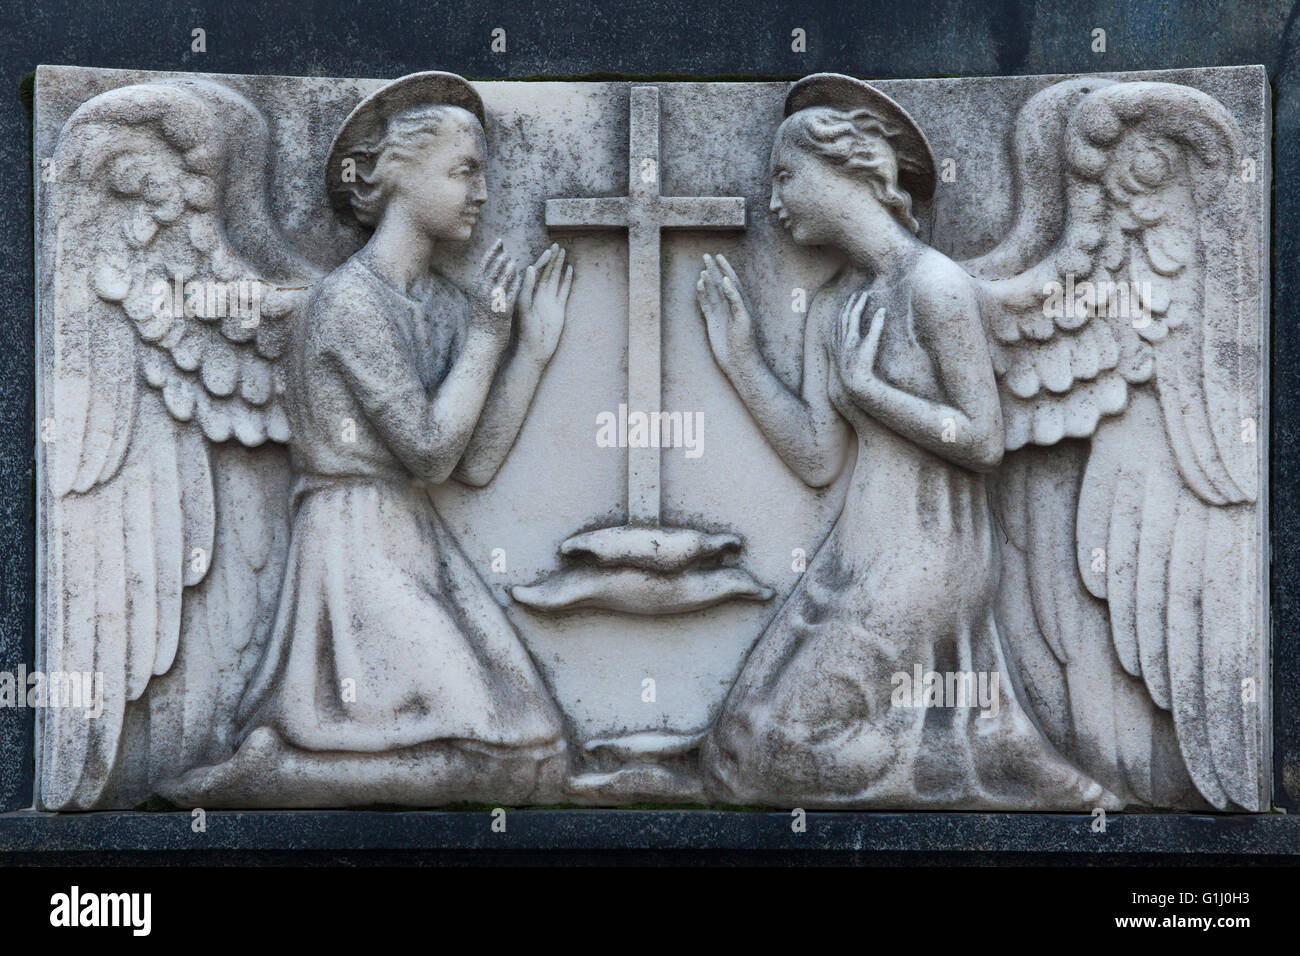 Two kneeling angels depicted in a tombstone at the Monumental Cemetery (Cimitero Monumentale di Milano) in Milan, Lombardy, Italy. Stock Photo